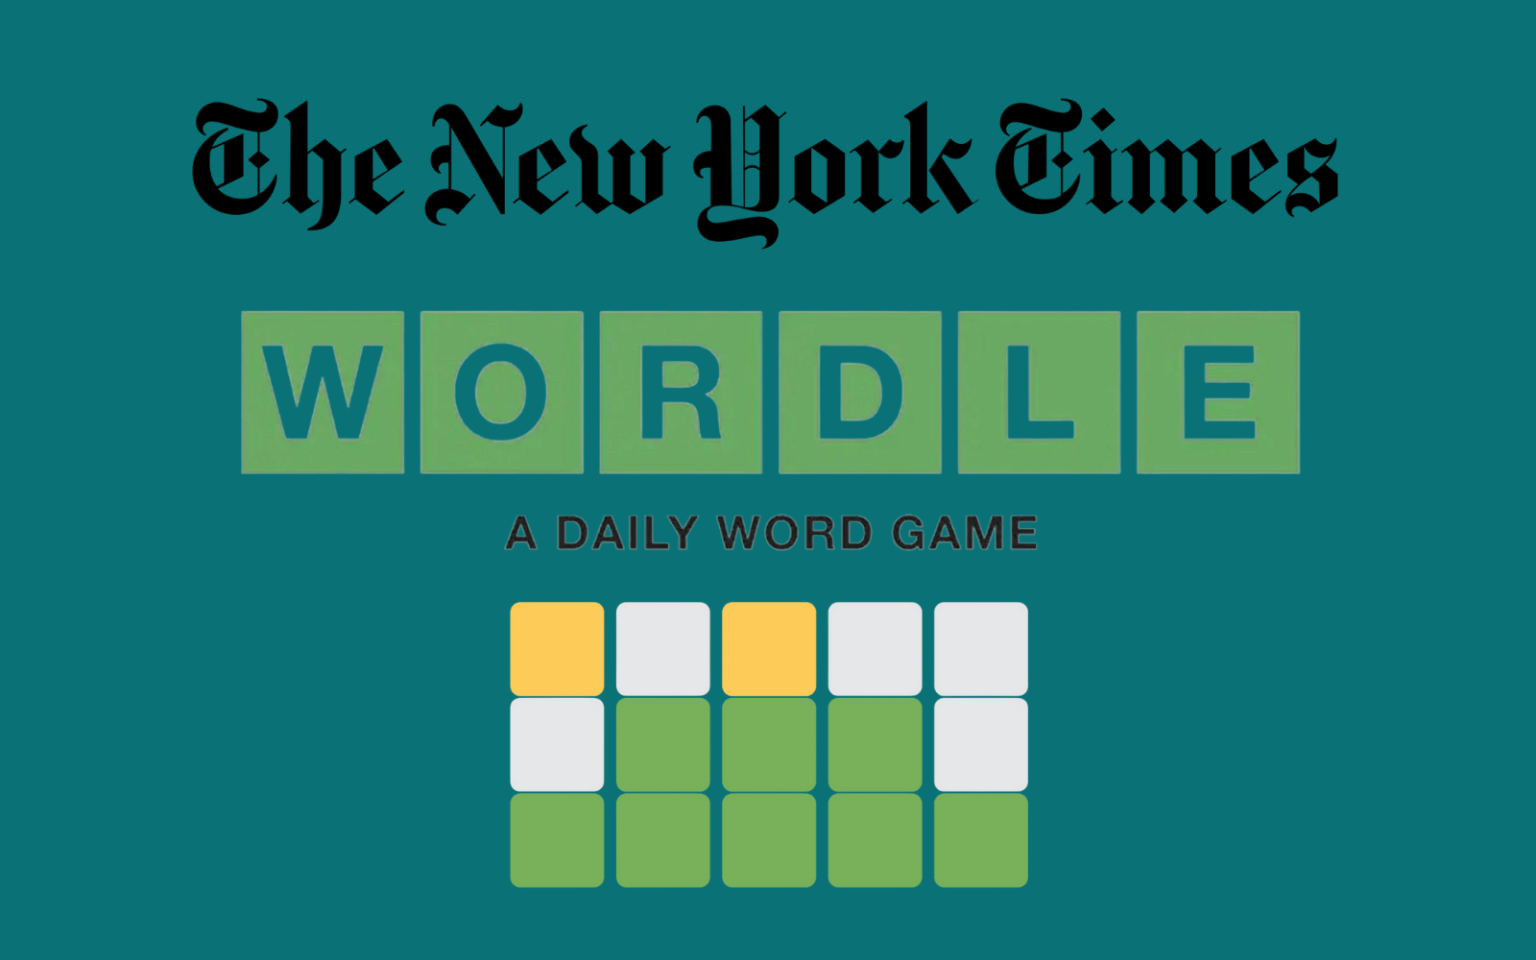 So it begins  The New York Times has gotten the Wordle Archive taken